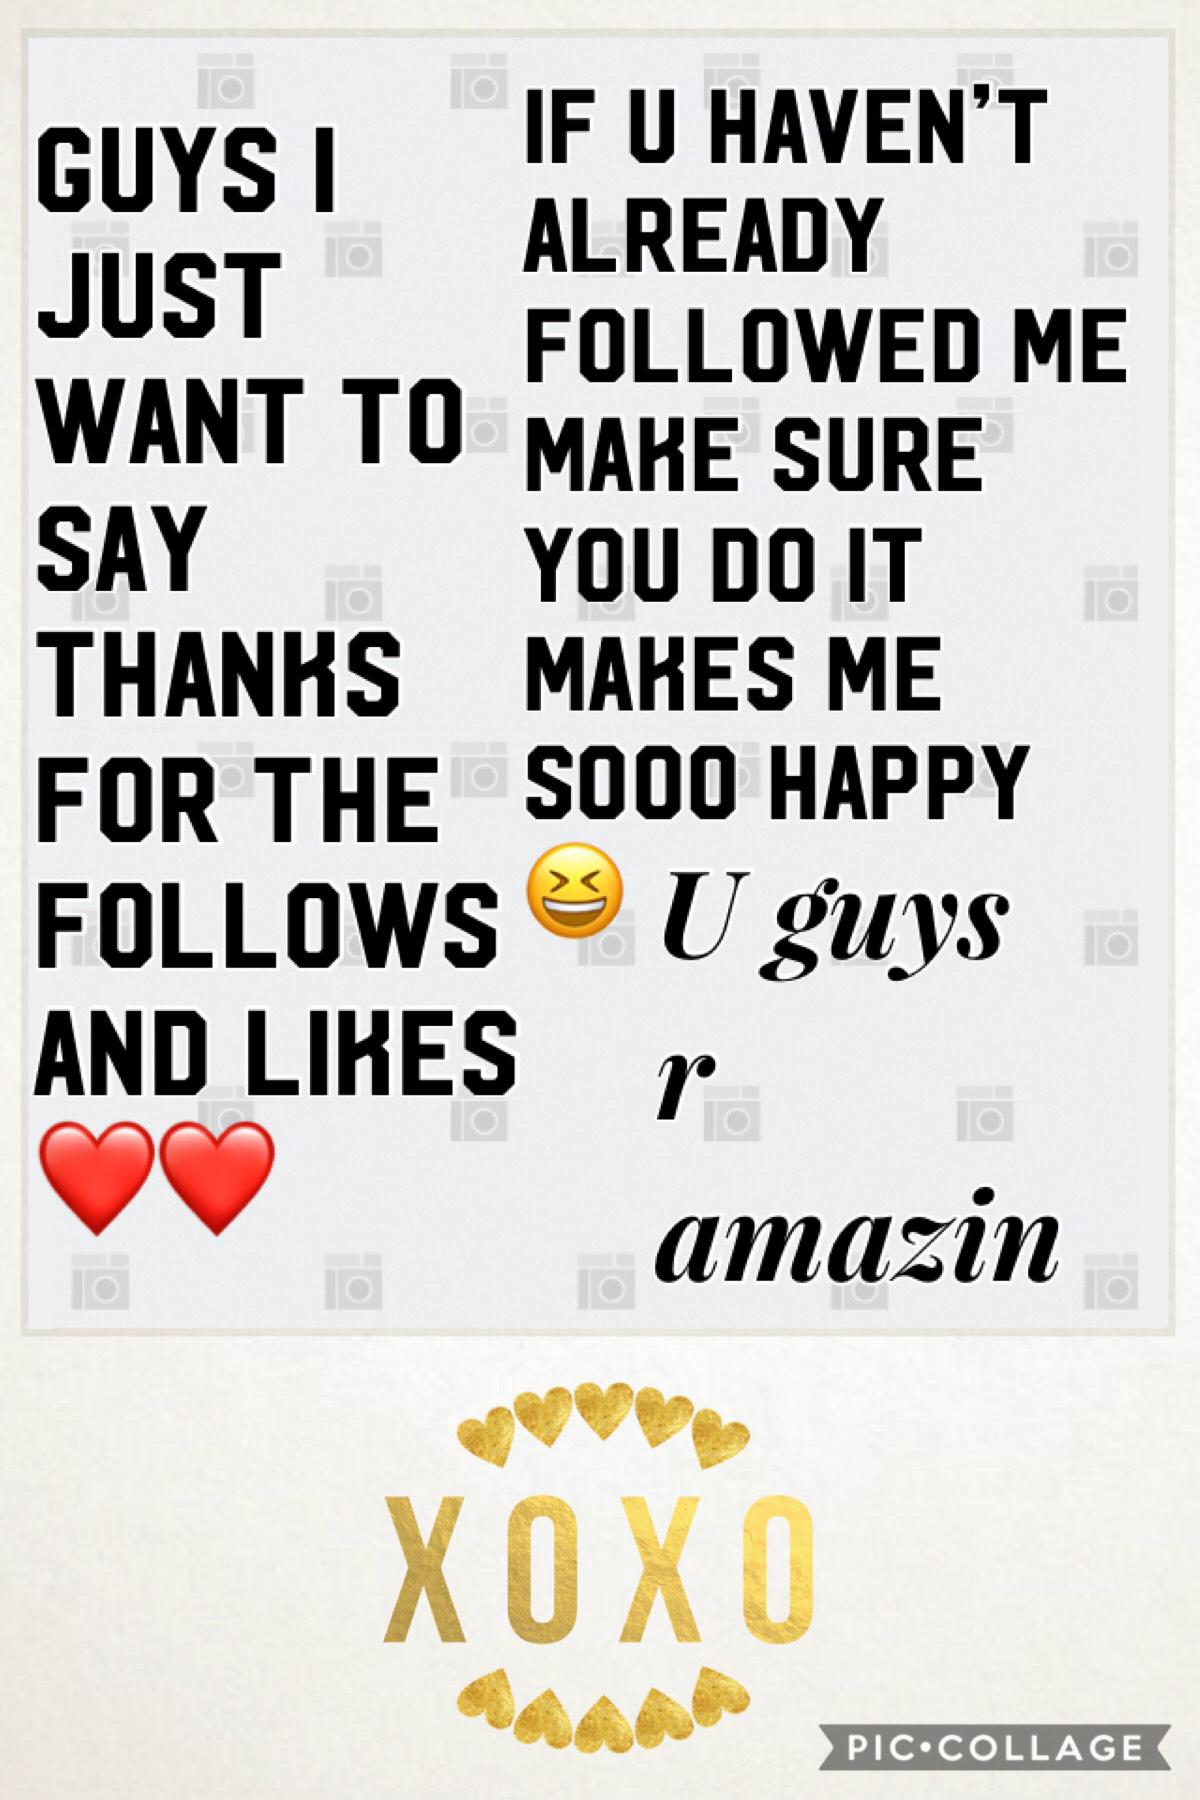 Thank u Guys soo much I’m new here and I’ve already got a lot of follows and likes